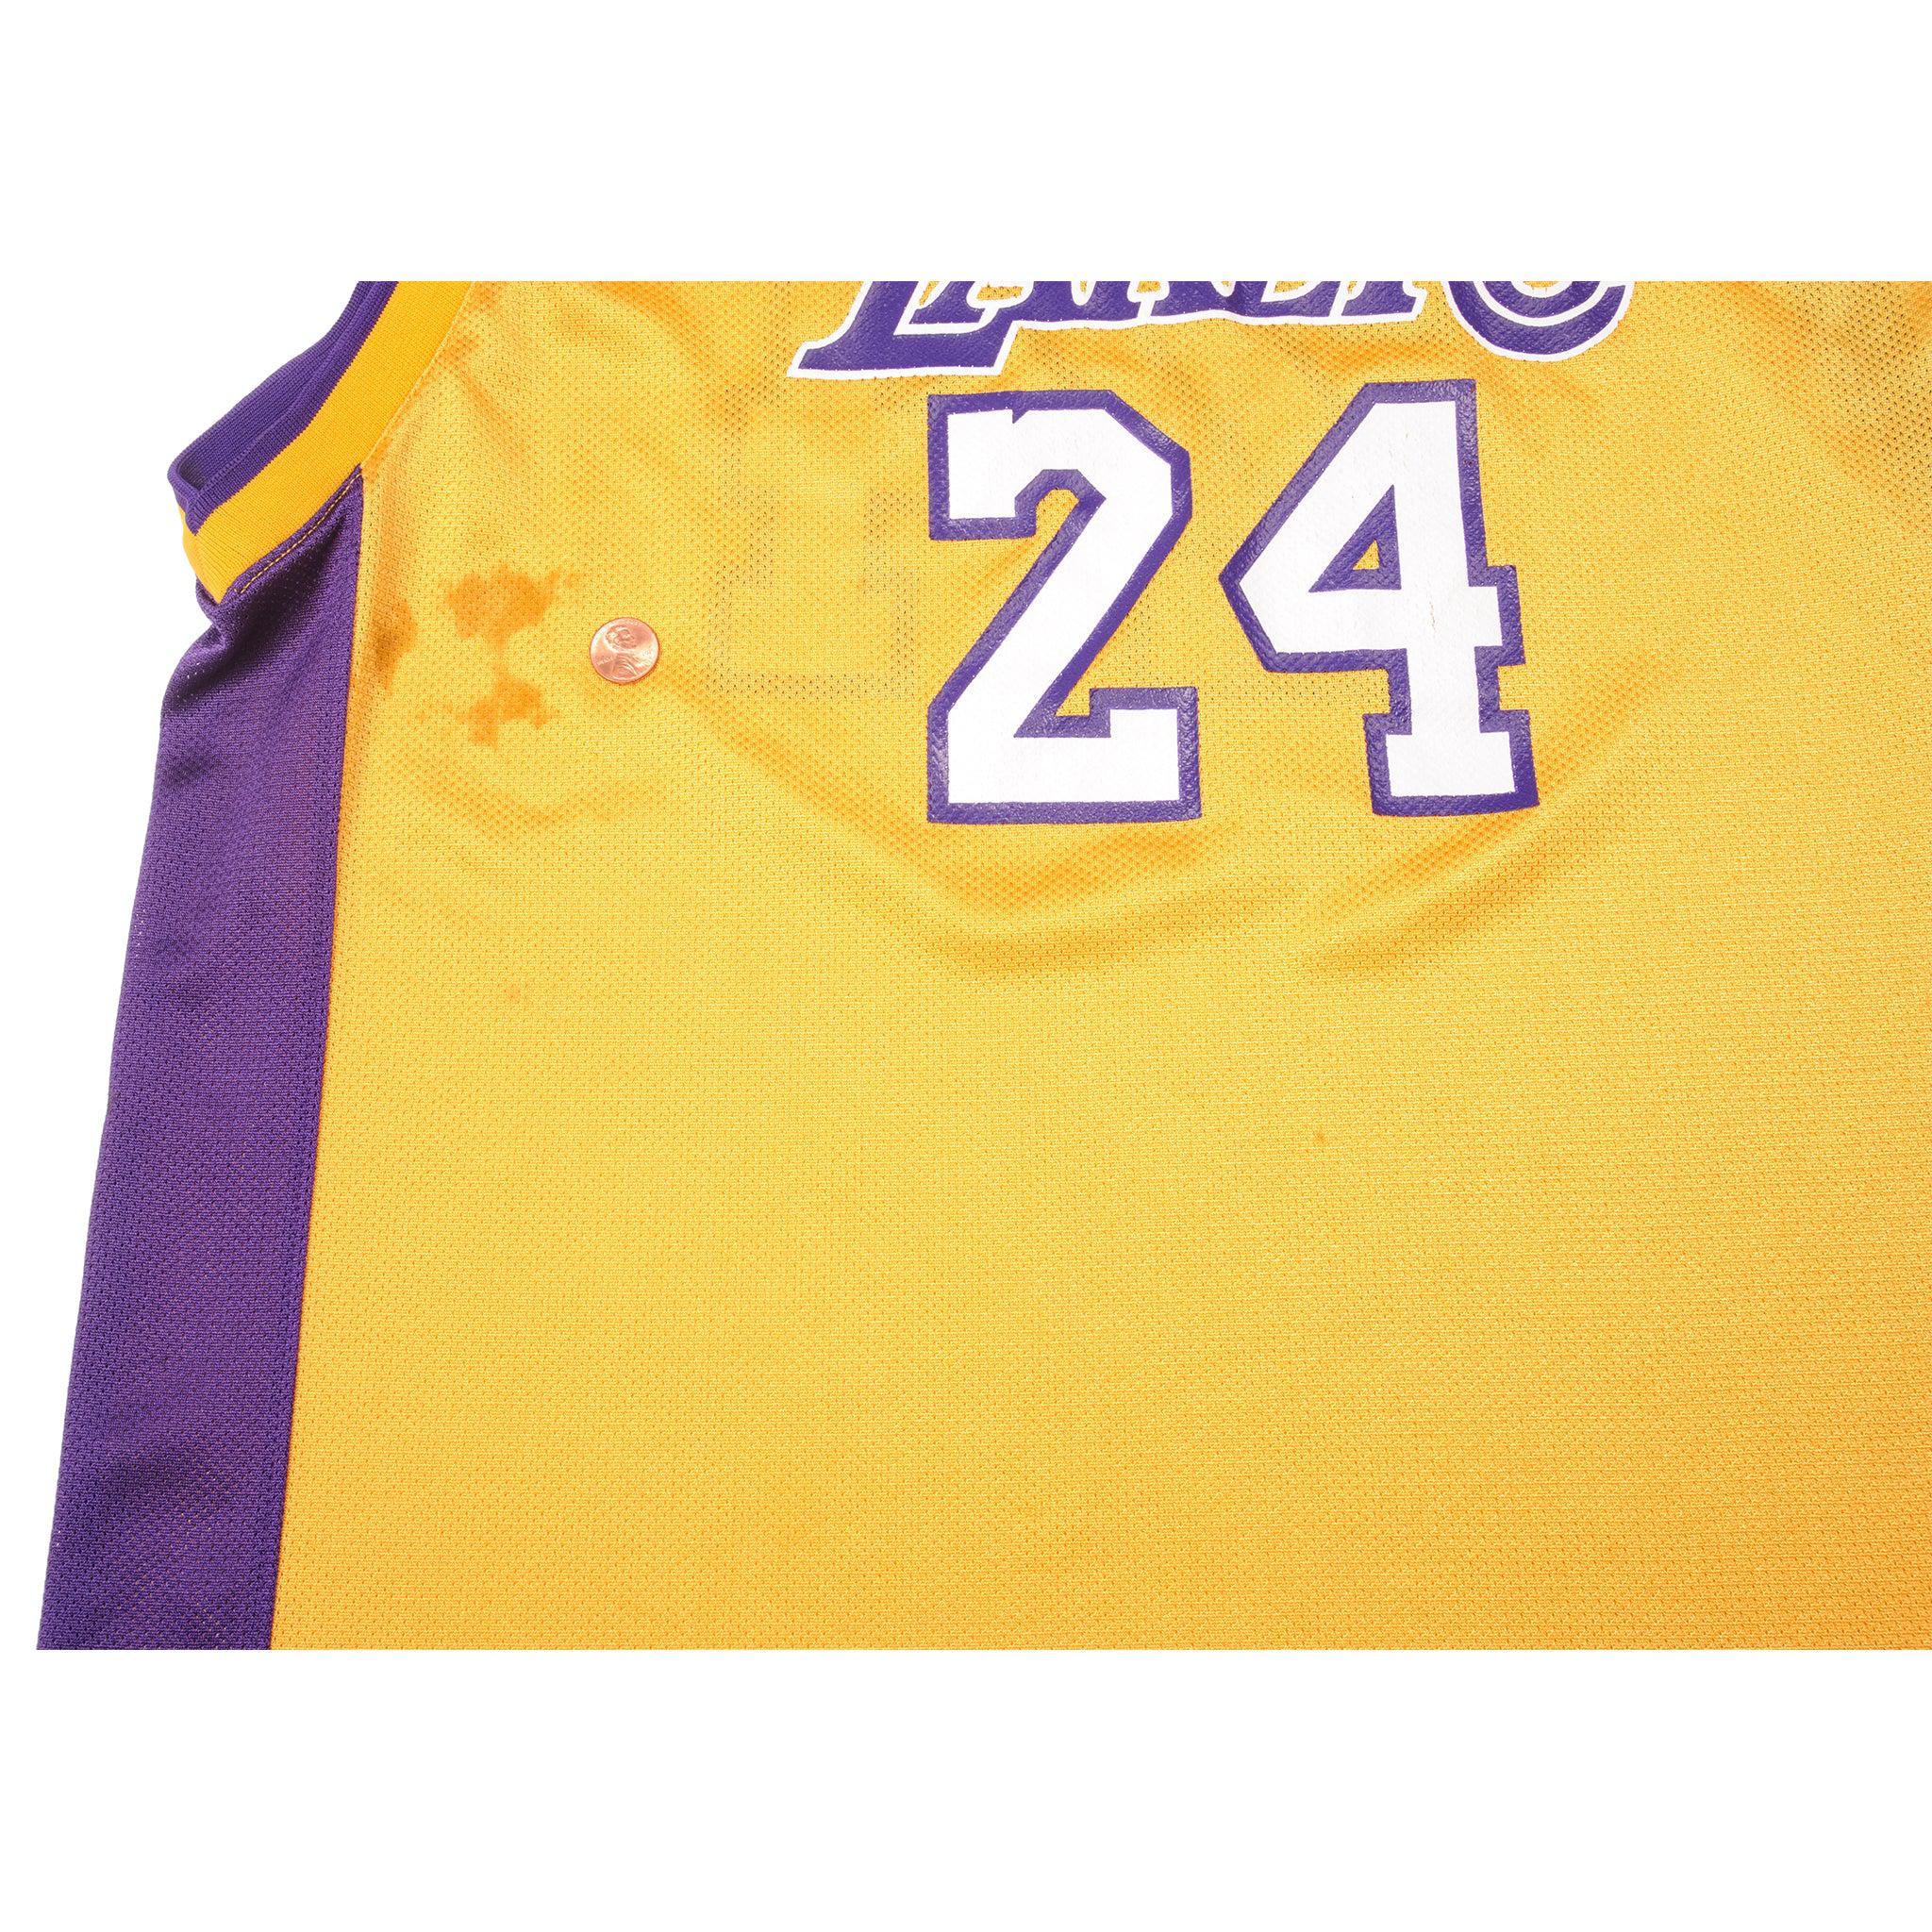 Kobe Bryant Adidas Authentic Away Los Angeles Lakers Jersey #24 (Size 44)